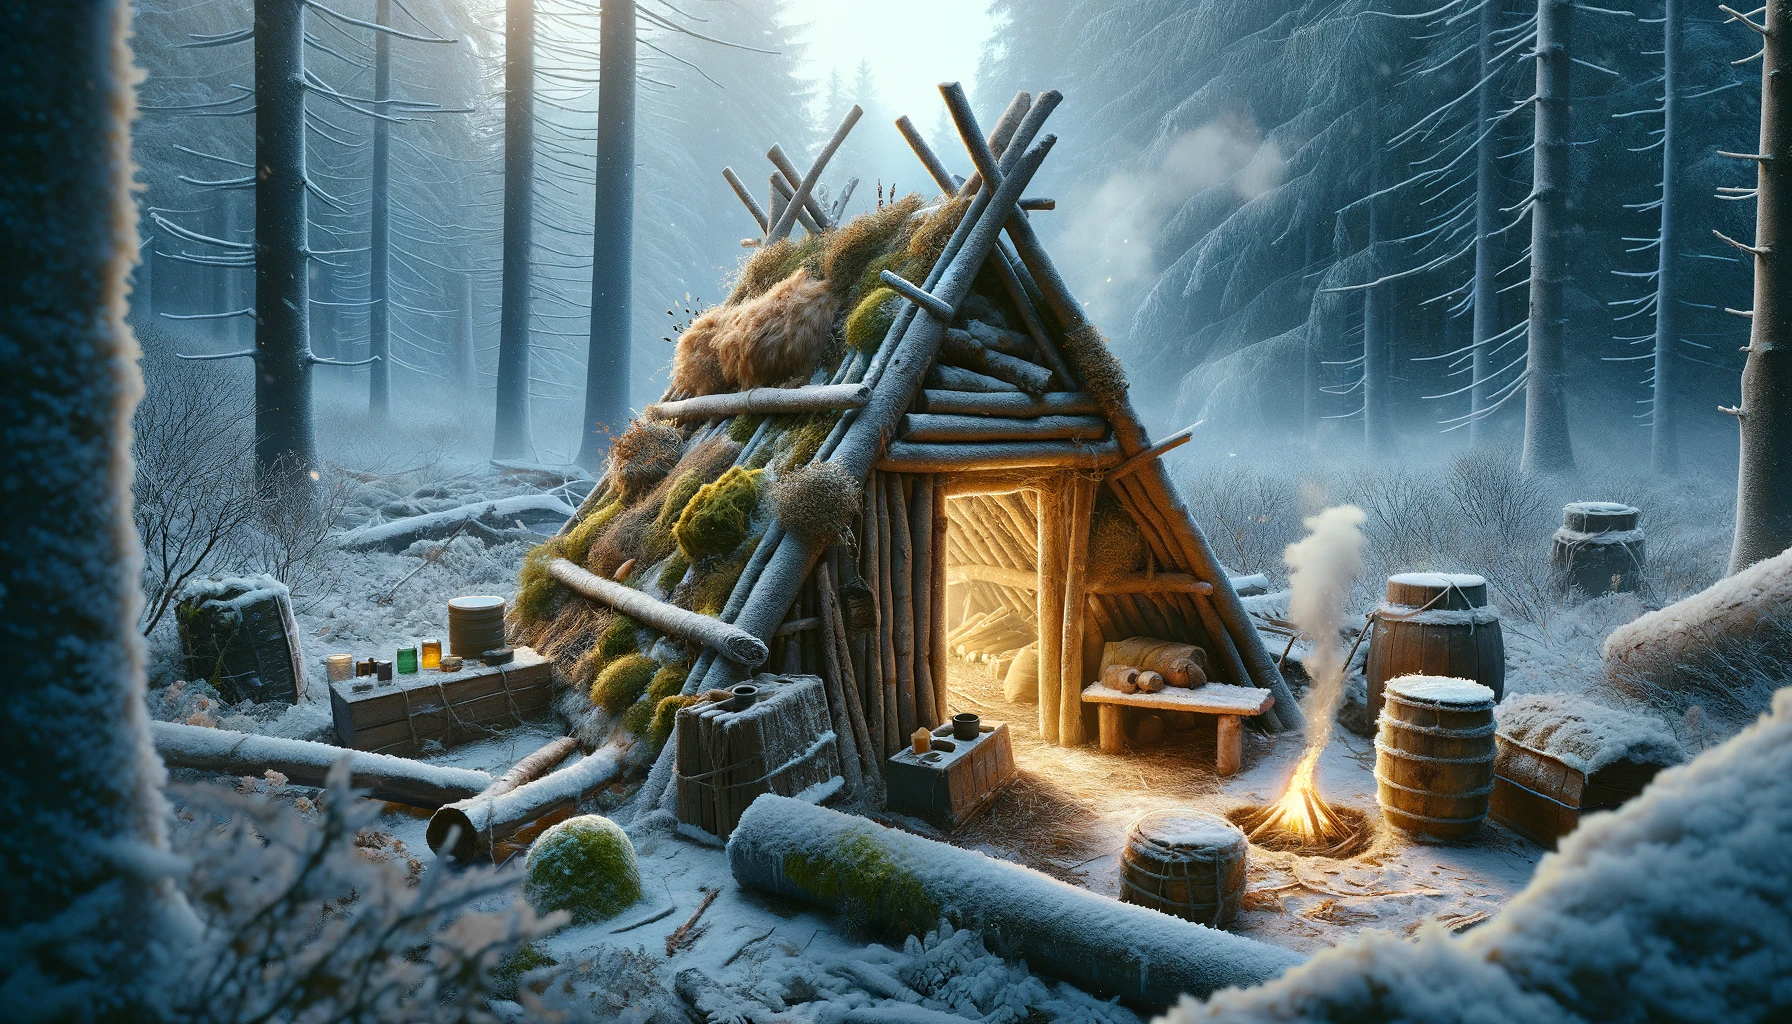 An engaging and detailed depiction of a well-insulated survival shelter in a snowy environment, highlighting the use of natural insulation materials such as moss, leaves, and debris. The shelter emits a warm glow and smoke, contrasting with the cold, winter forest backdrop, showcasing the importance of insulation and survival skills in extreme weather conditions.